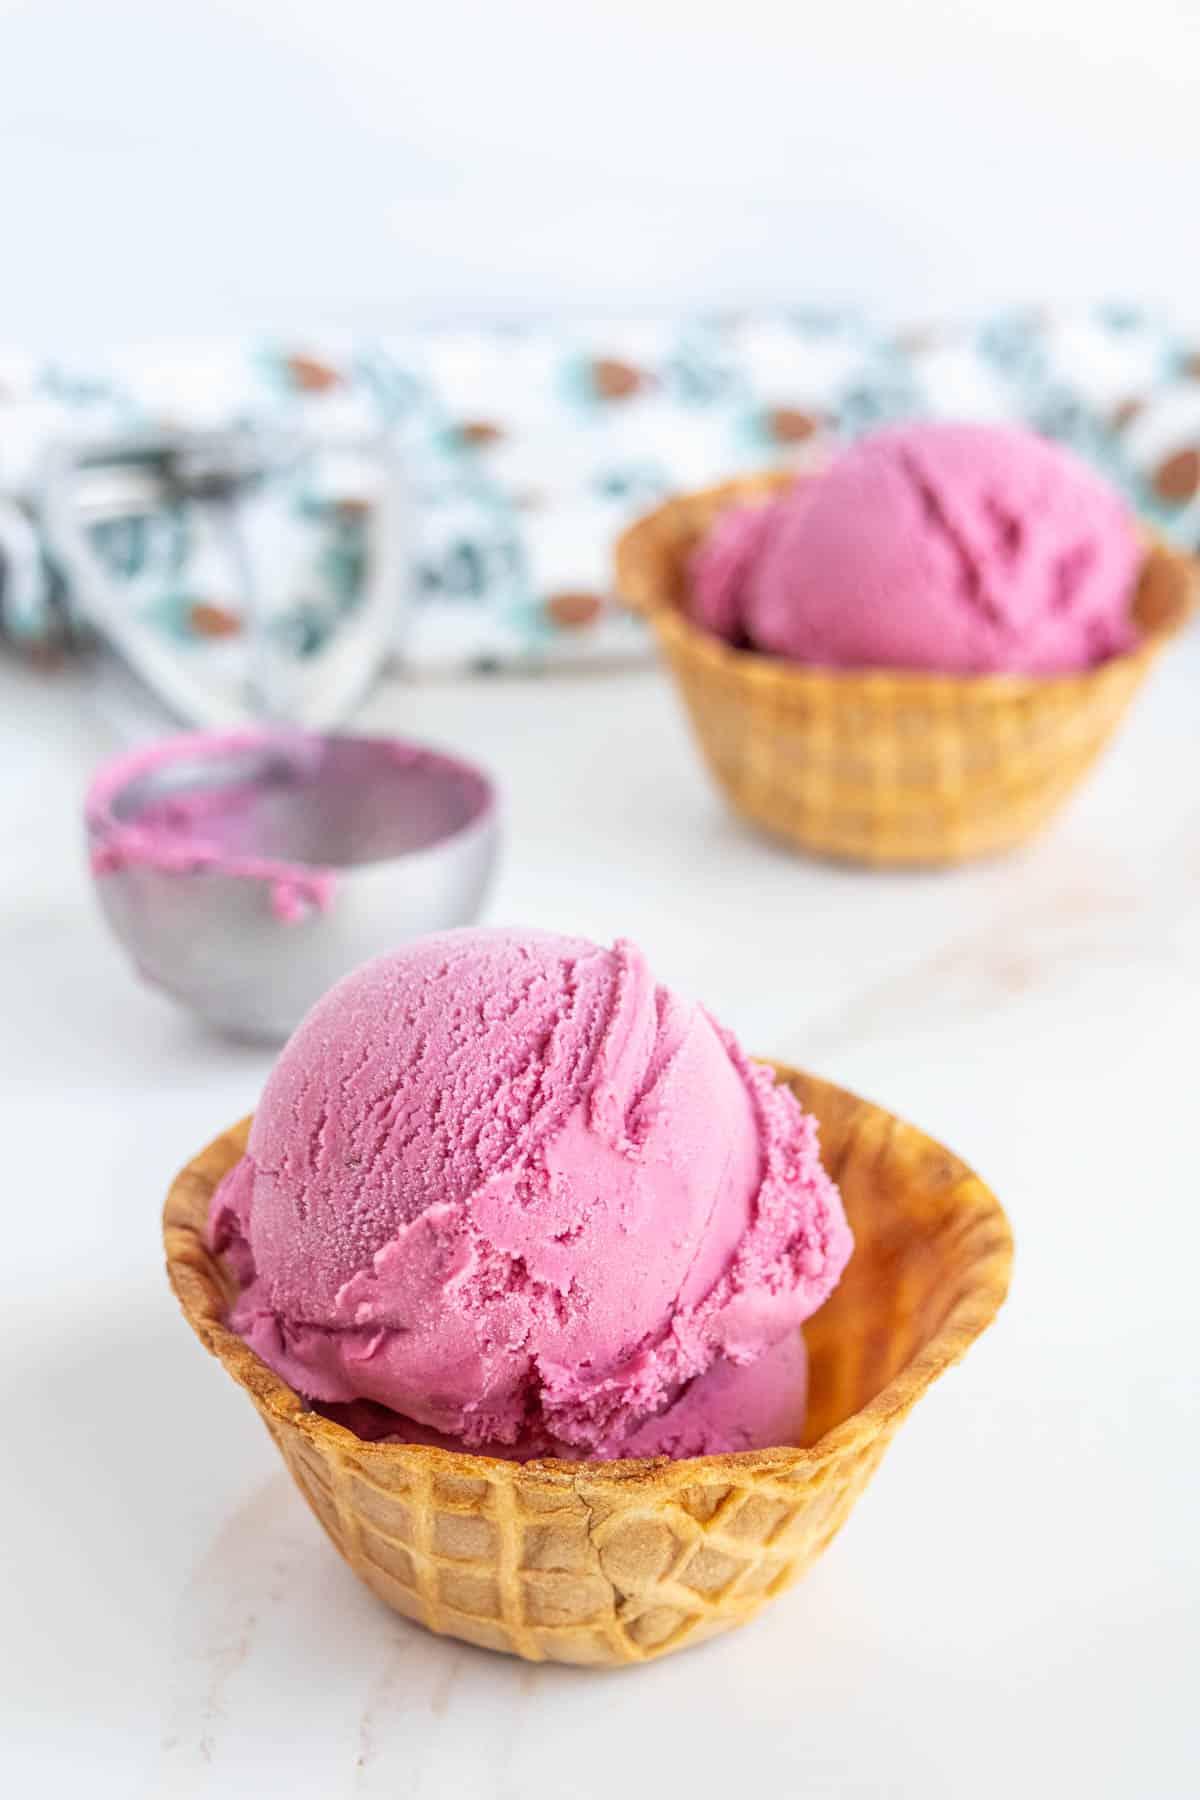 Two scoops of raspberry ice cream served in waffle bowls, with an ice cream scoop and patterned cloth in the background.